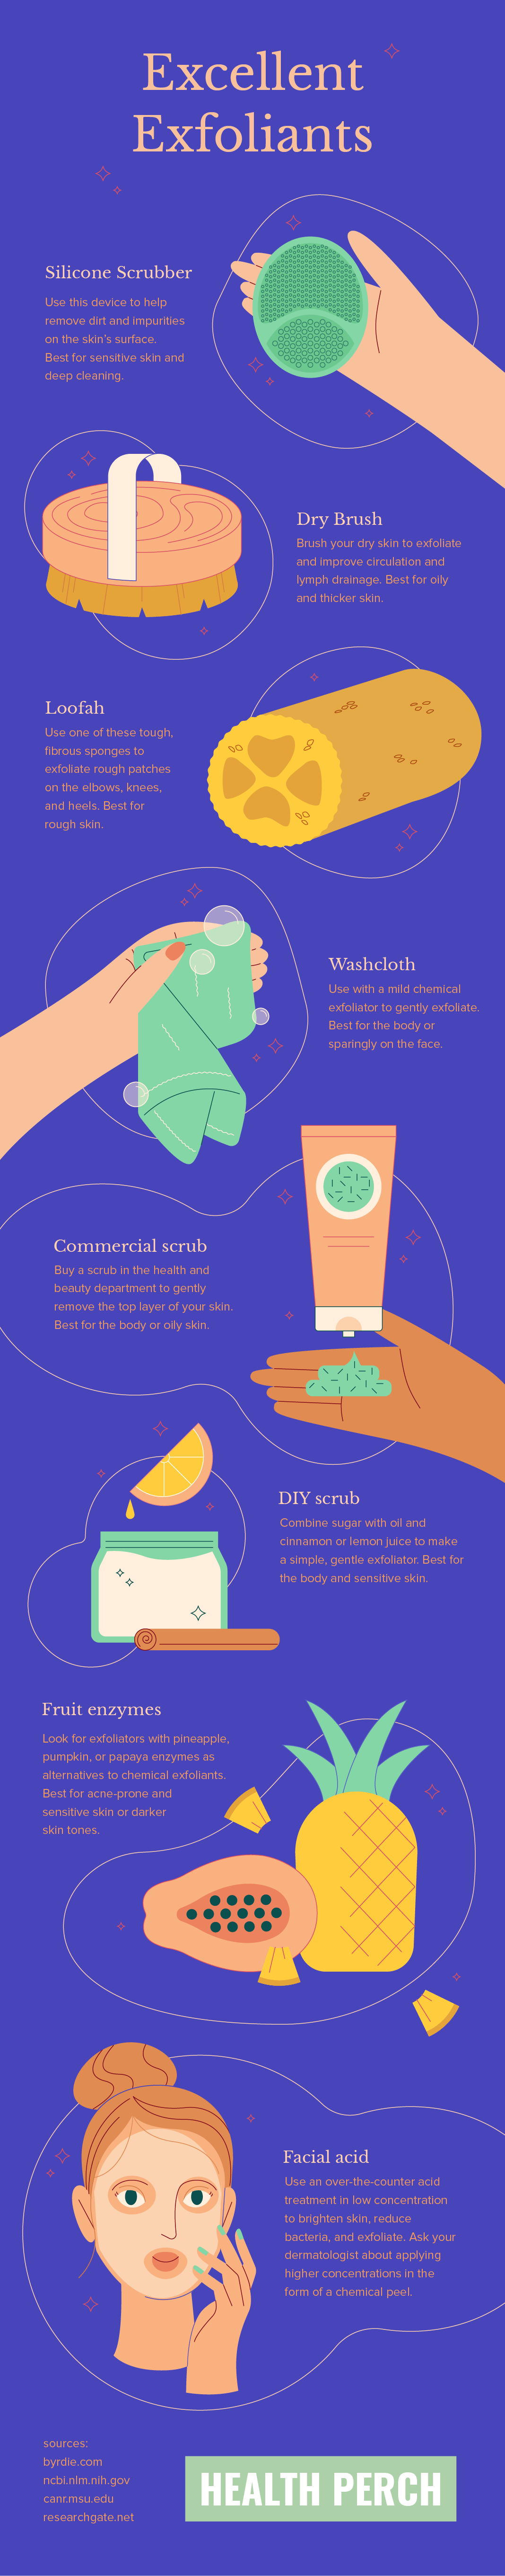 How Often Should You Exfoliate Your Skin and With What?